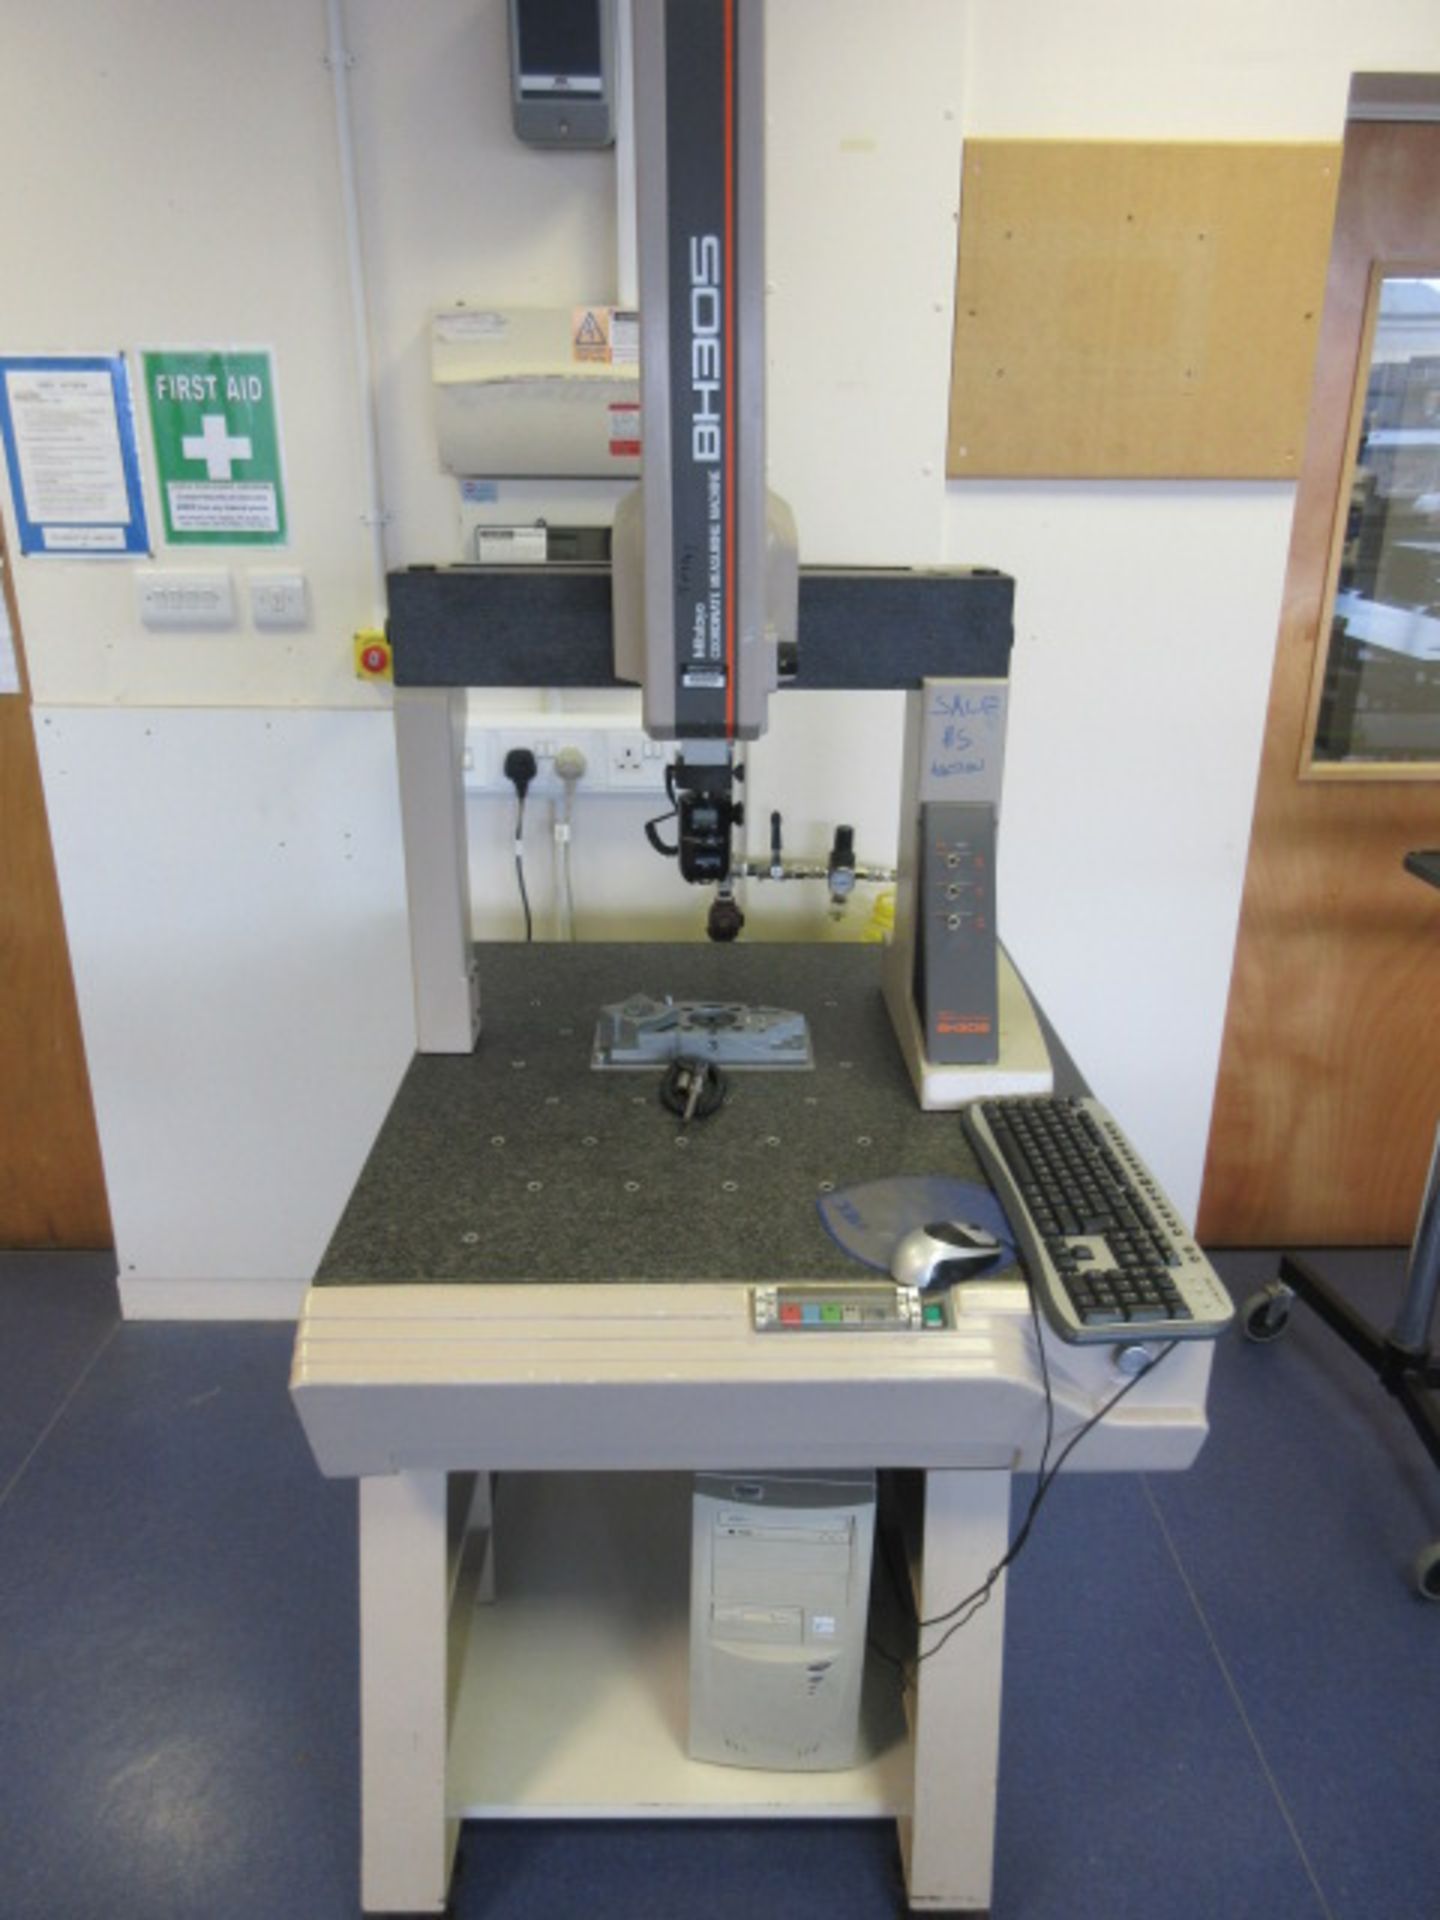 MITUTOYO BH305 CO-ORDINATE MEASURING MACHINE WITH RENISHAW MIH PROBE & COMPUTER. TABLE SIZE 930 MM X